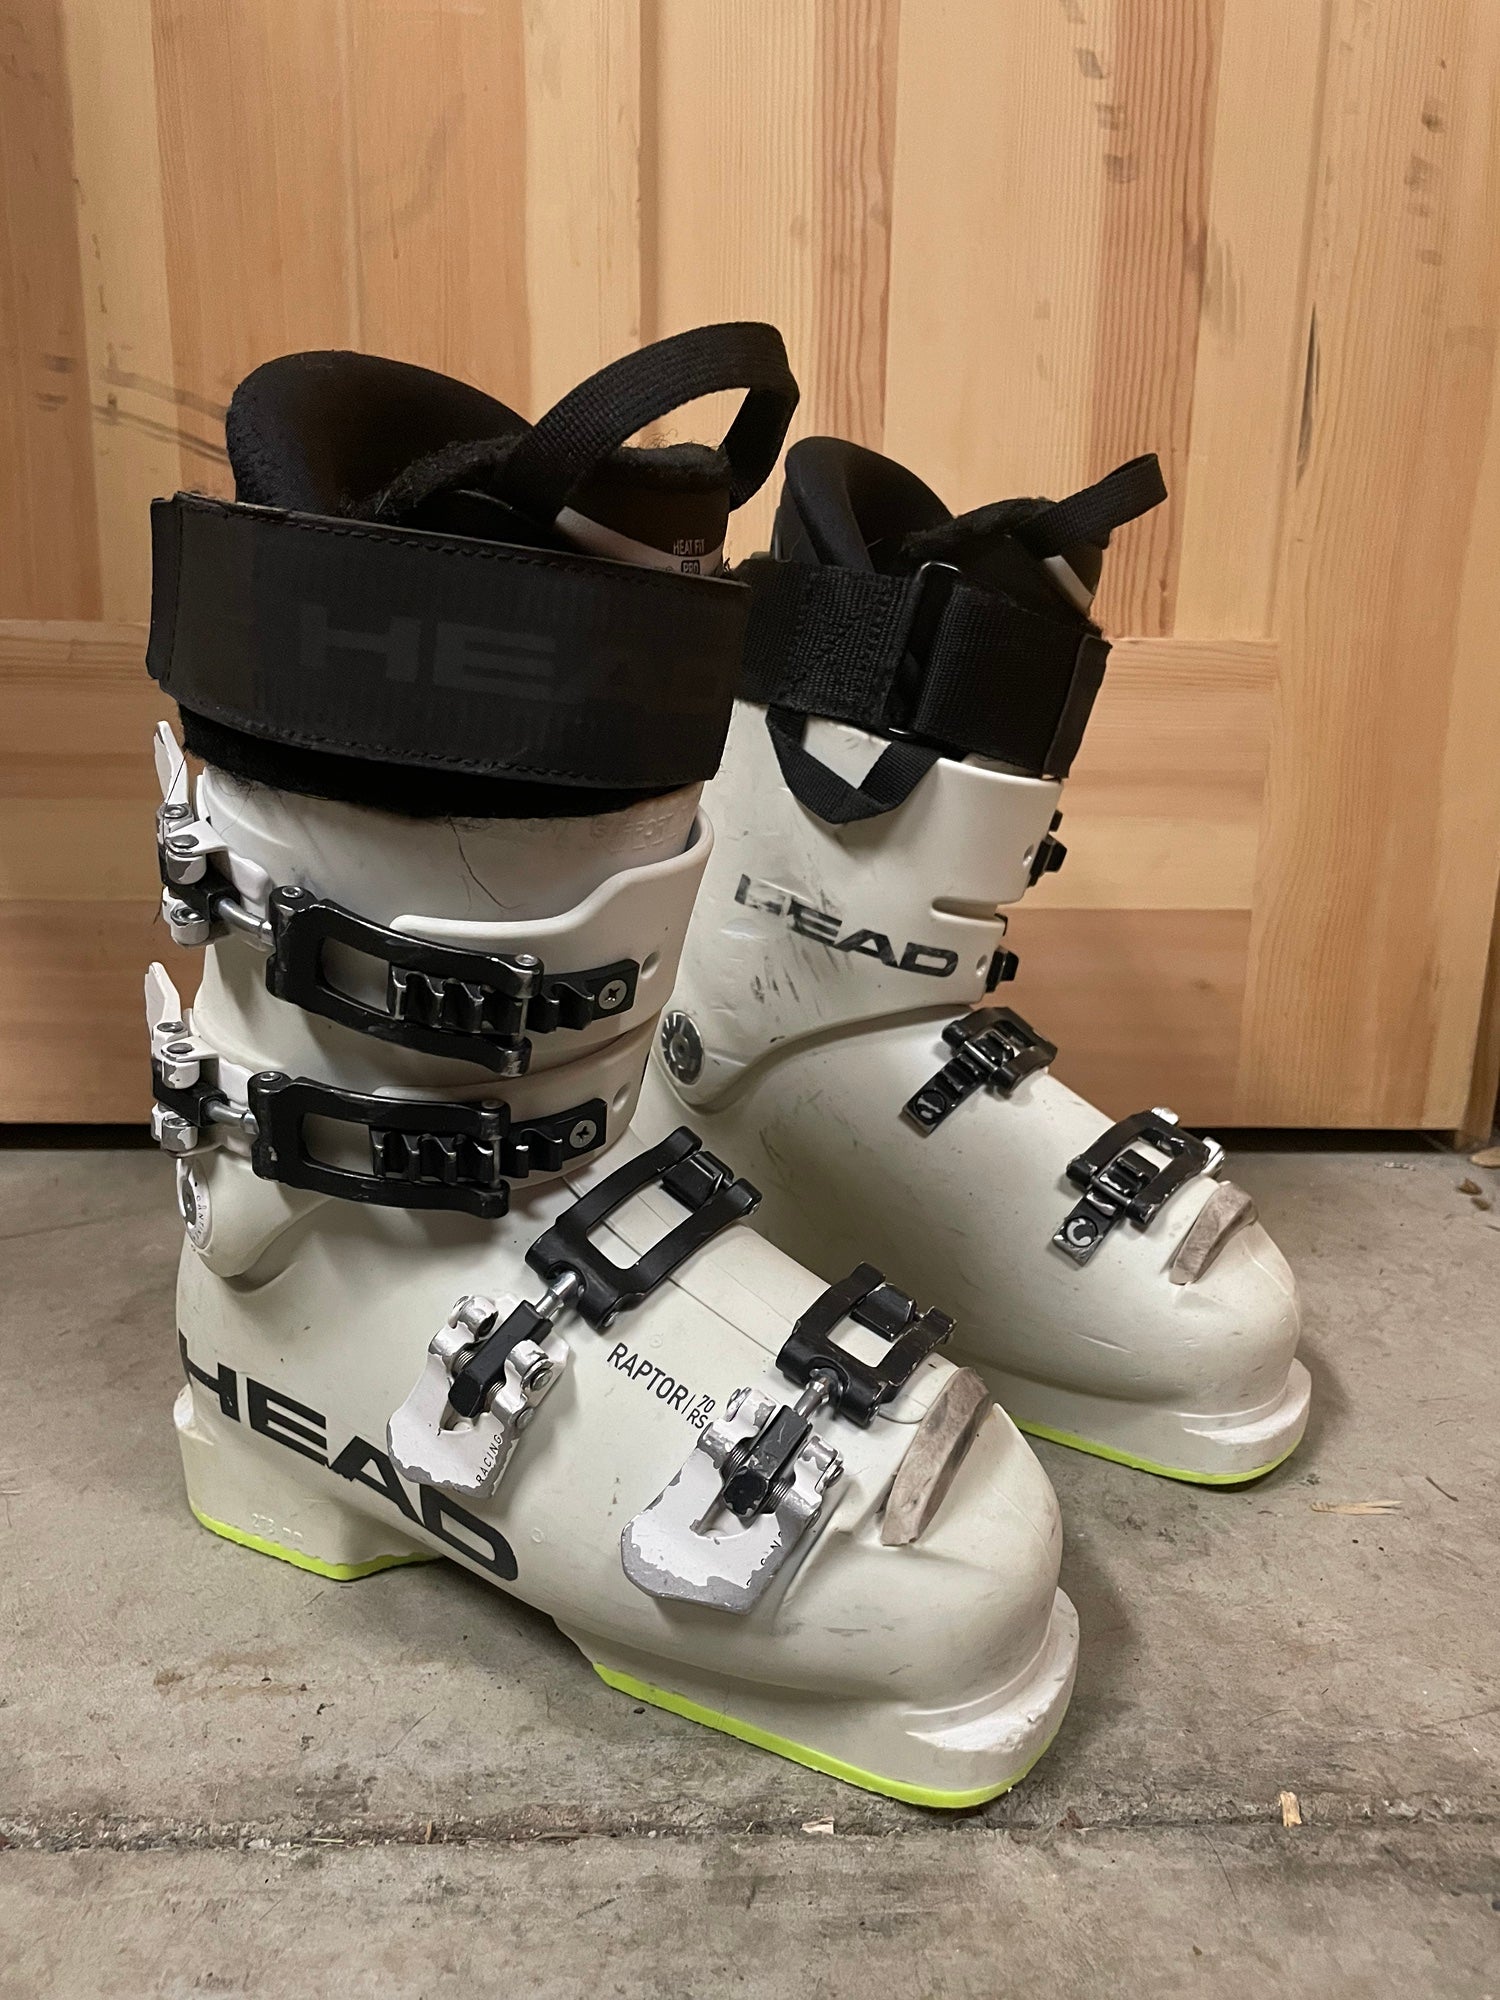 HEAD Raptor RS Downhill Ski Boots | Used and New on SidelineSwap